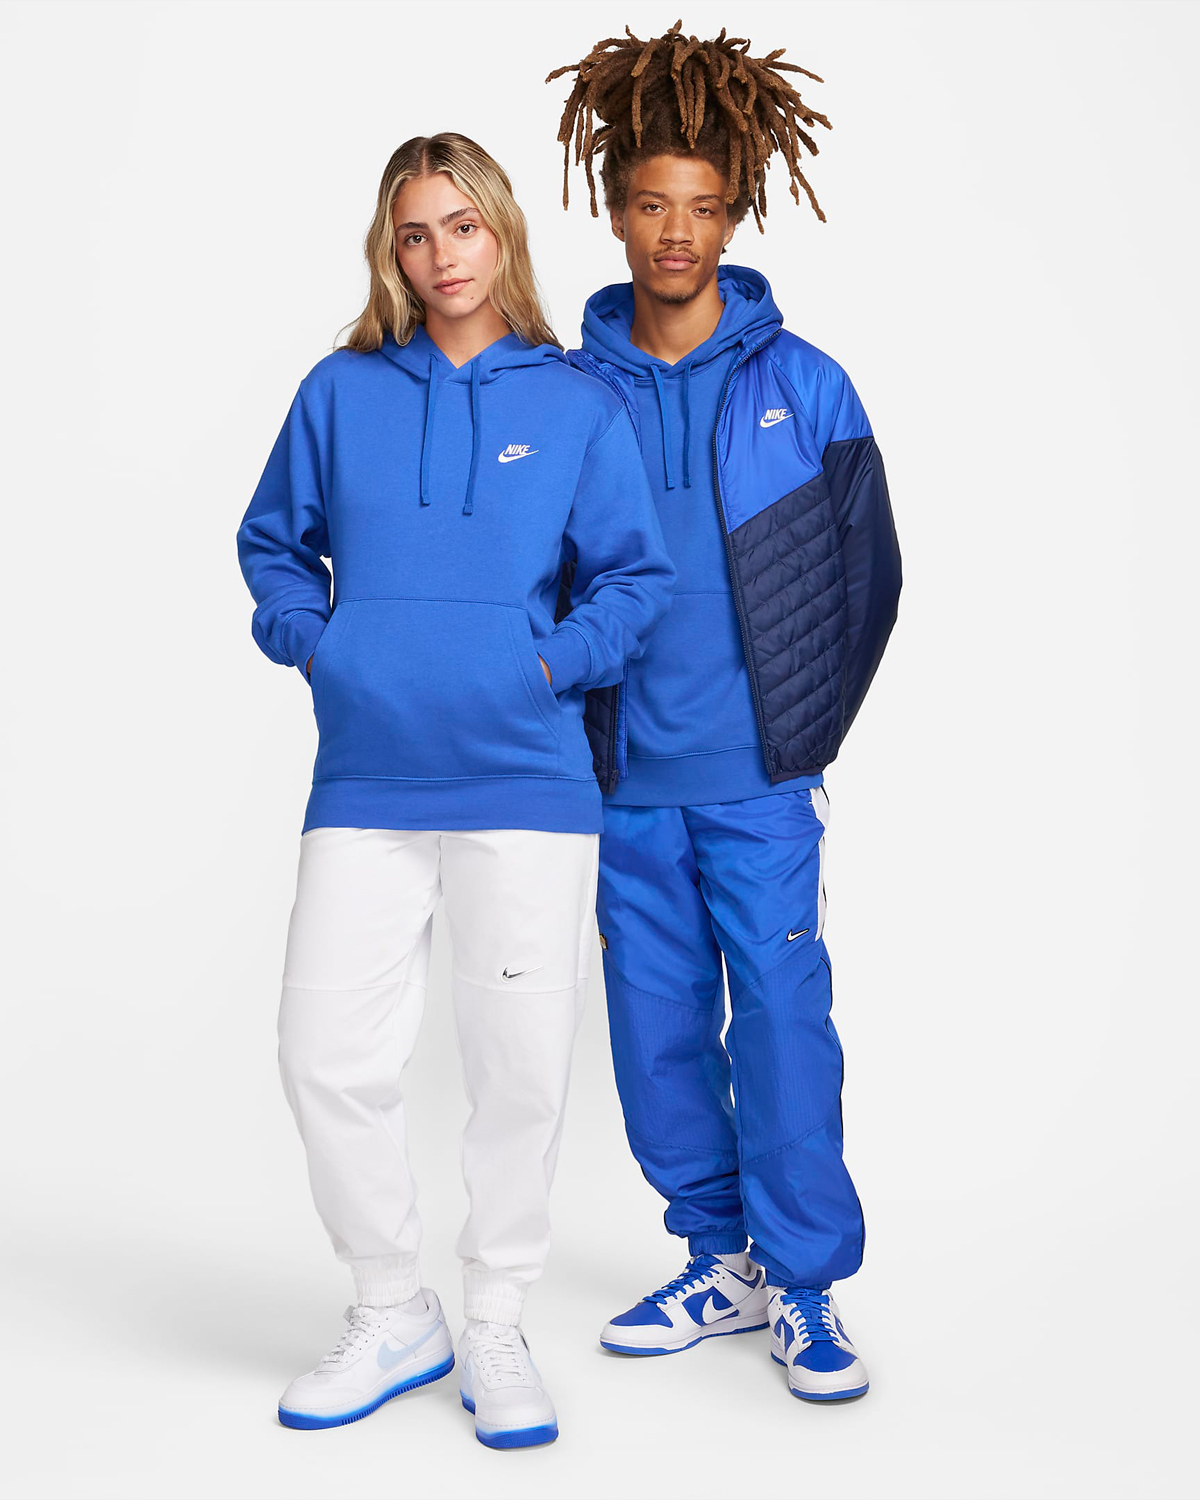 Nike Game Royal Clothing Shirts Hoodies Pants Sneakers Outfits